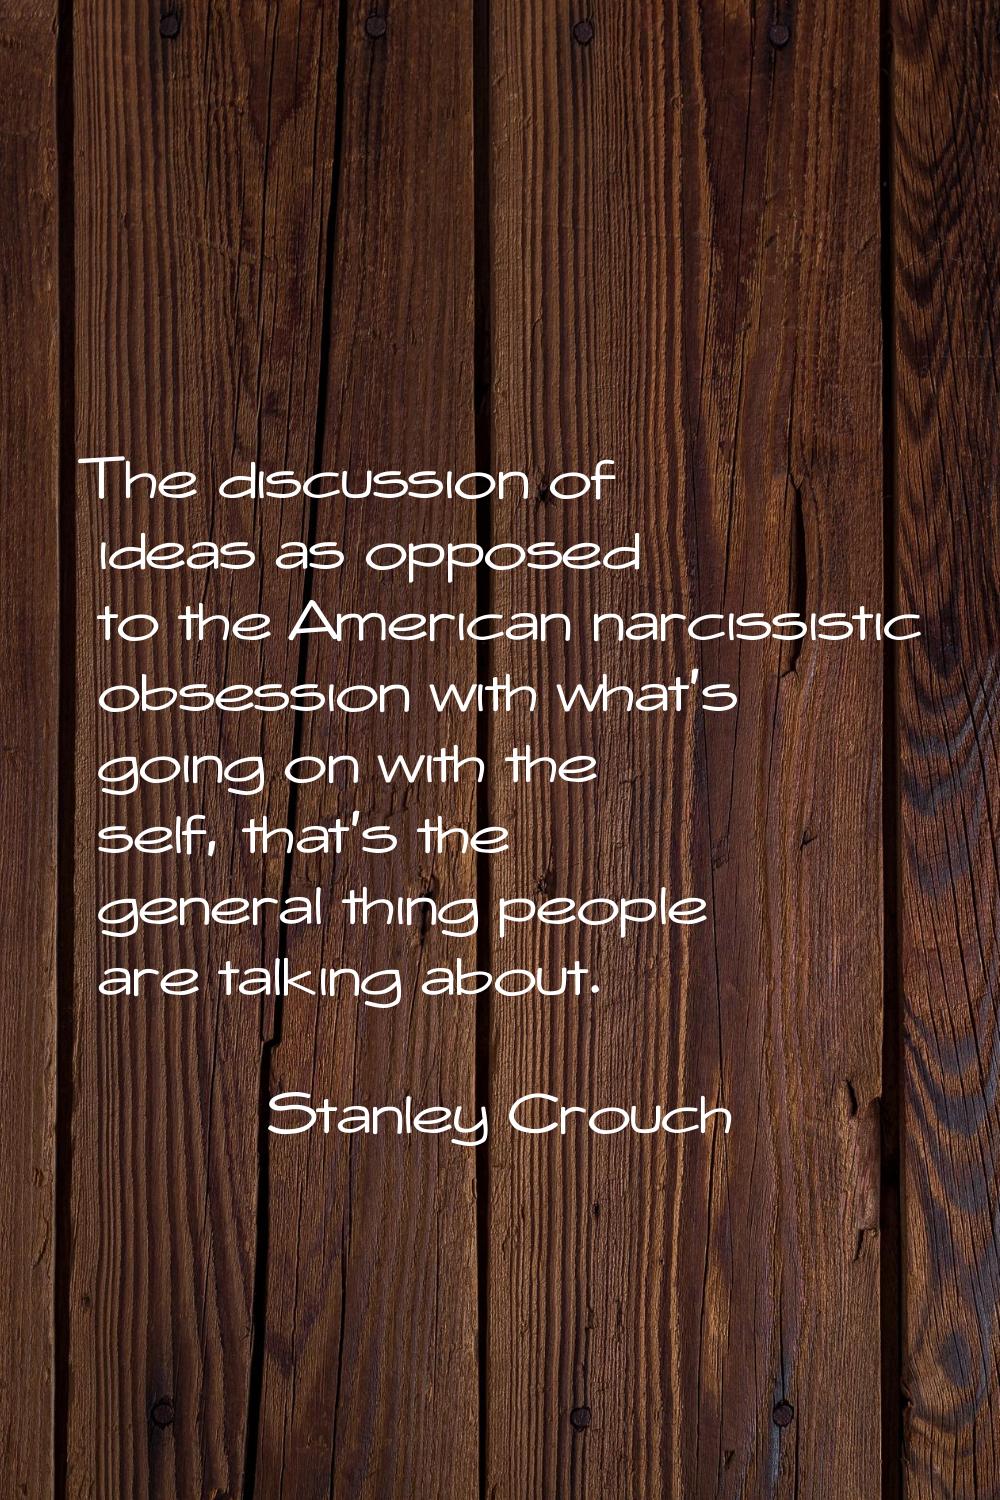 The discussion of ideas as opposed to the American narcissistic obsession with what's going on with